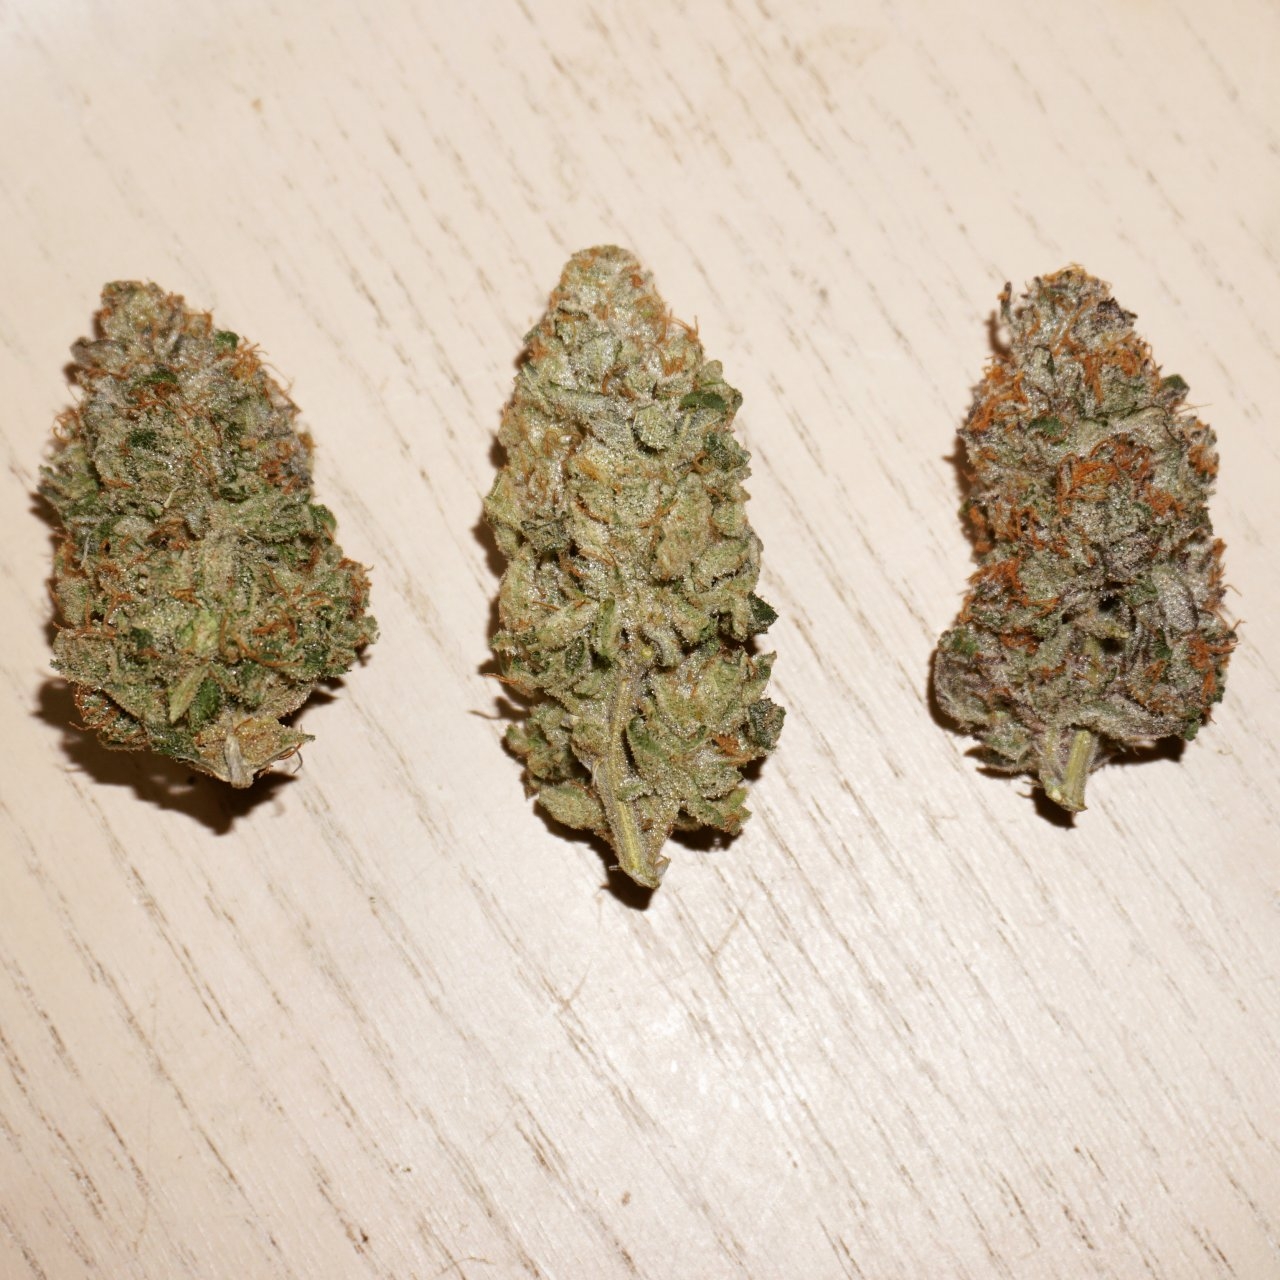 Three different nugs from three phenotypes found in seeds I made last year All fire